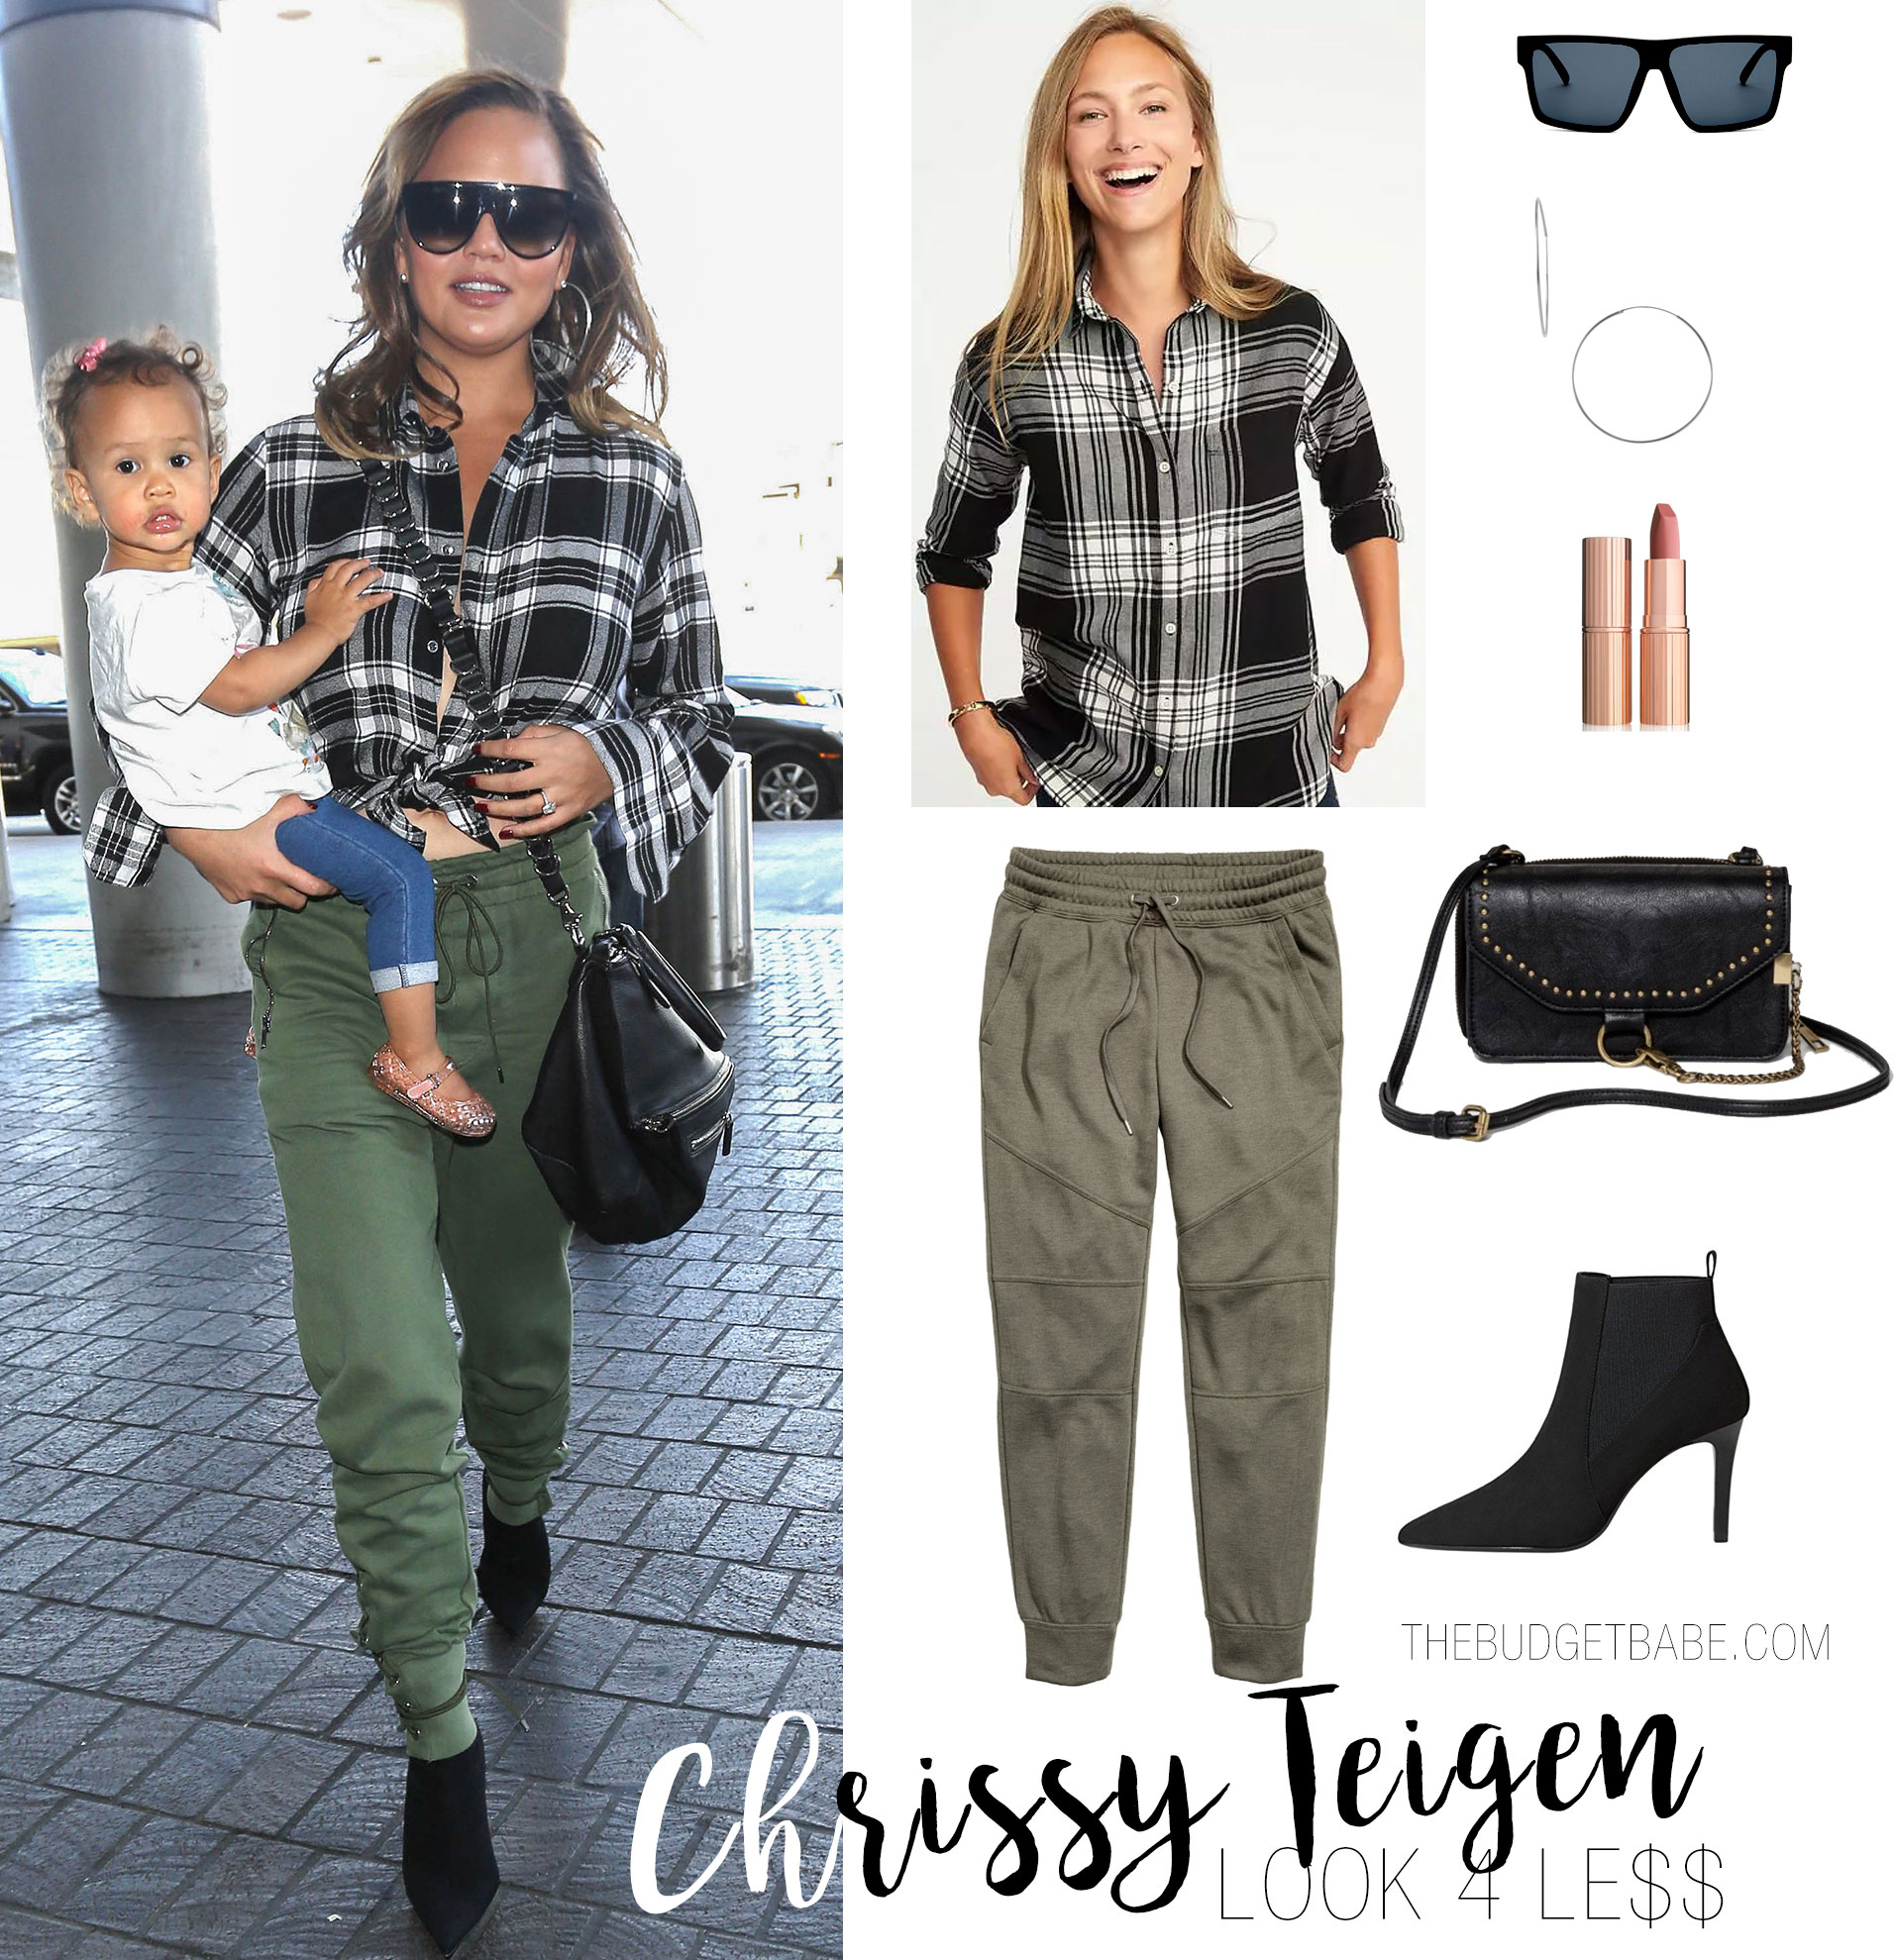 Chrissy Teigen wears a plaid shirt, olive cargo joggers and black stiletto ankle boots.